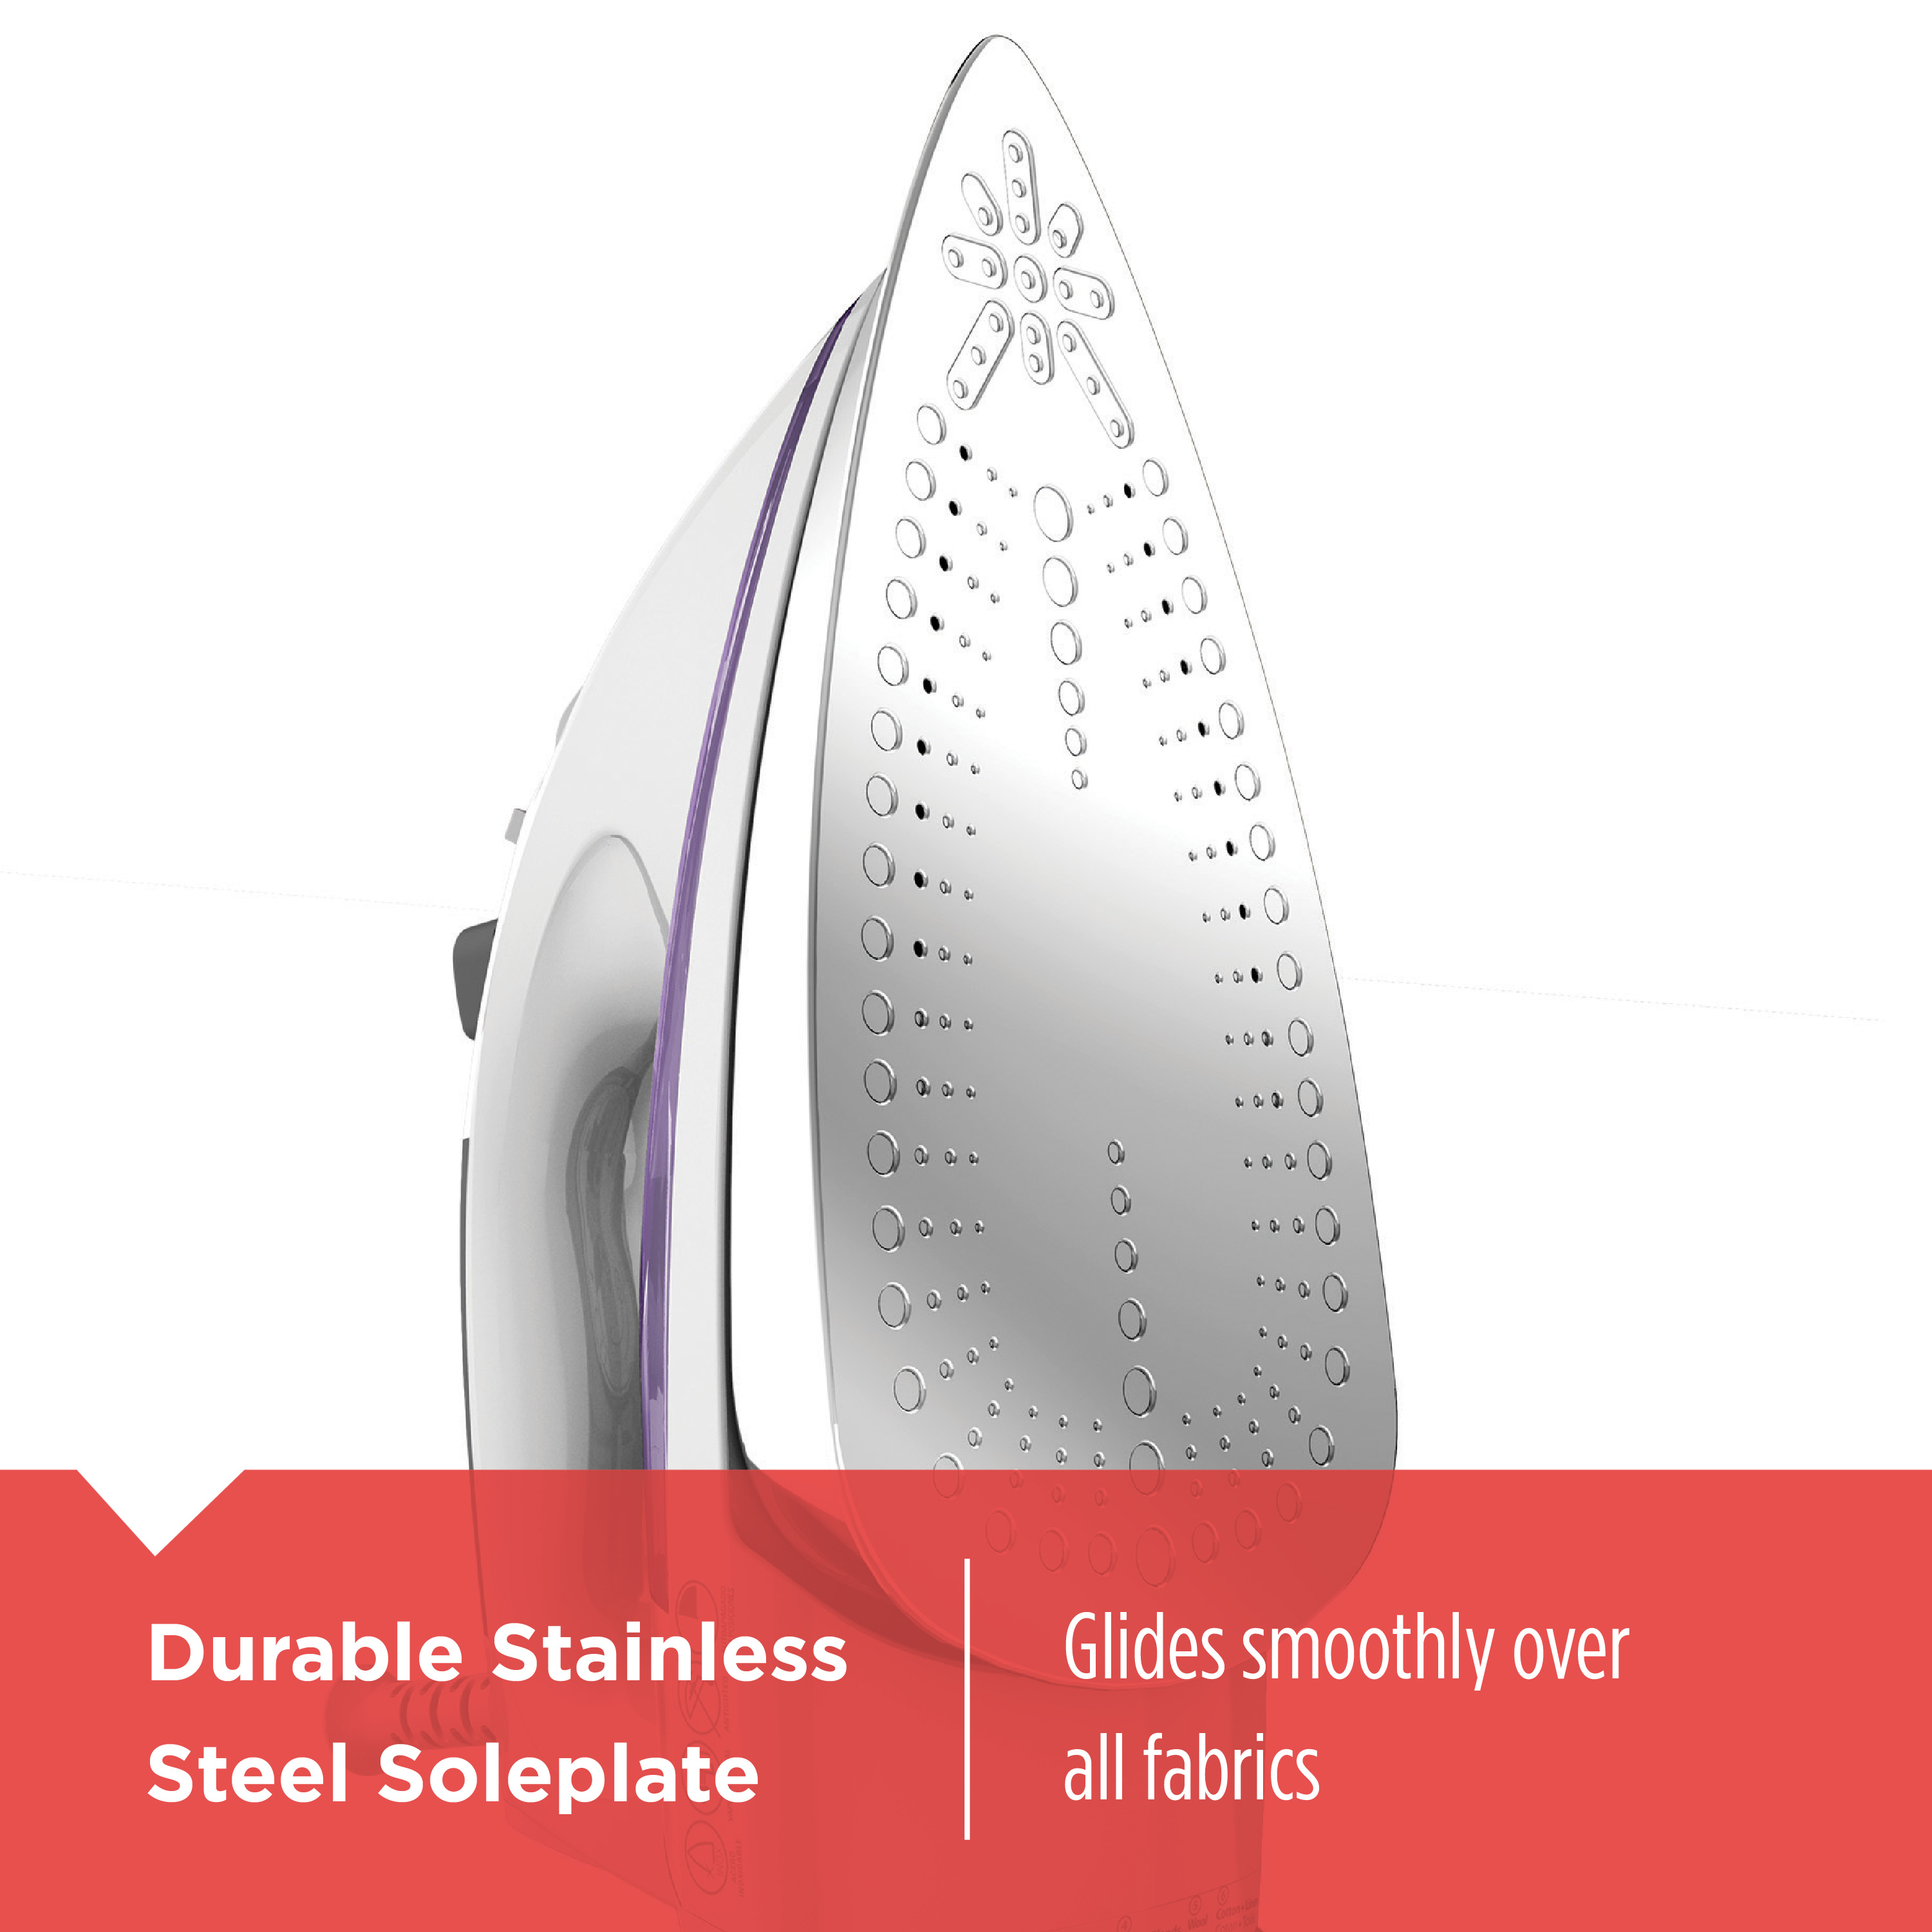 BLACK+DECKER Professional Steam Iron with Stainless Steel Soleplate and Extra-Long Cord, Purple, IR1350S - image 5 of 11